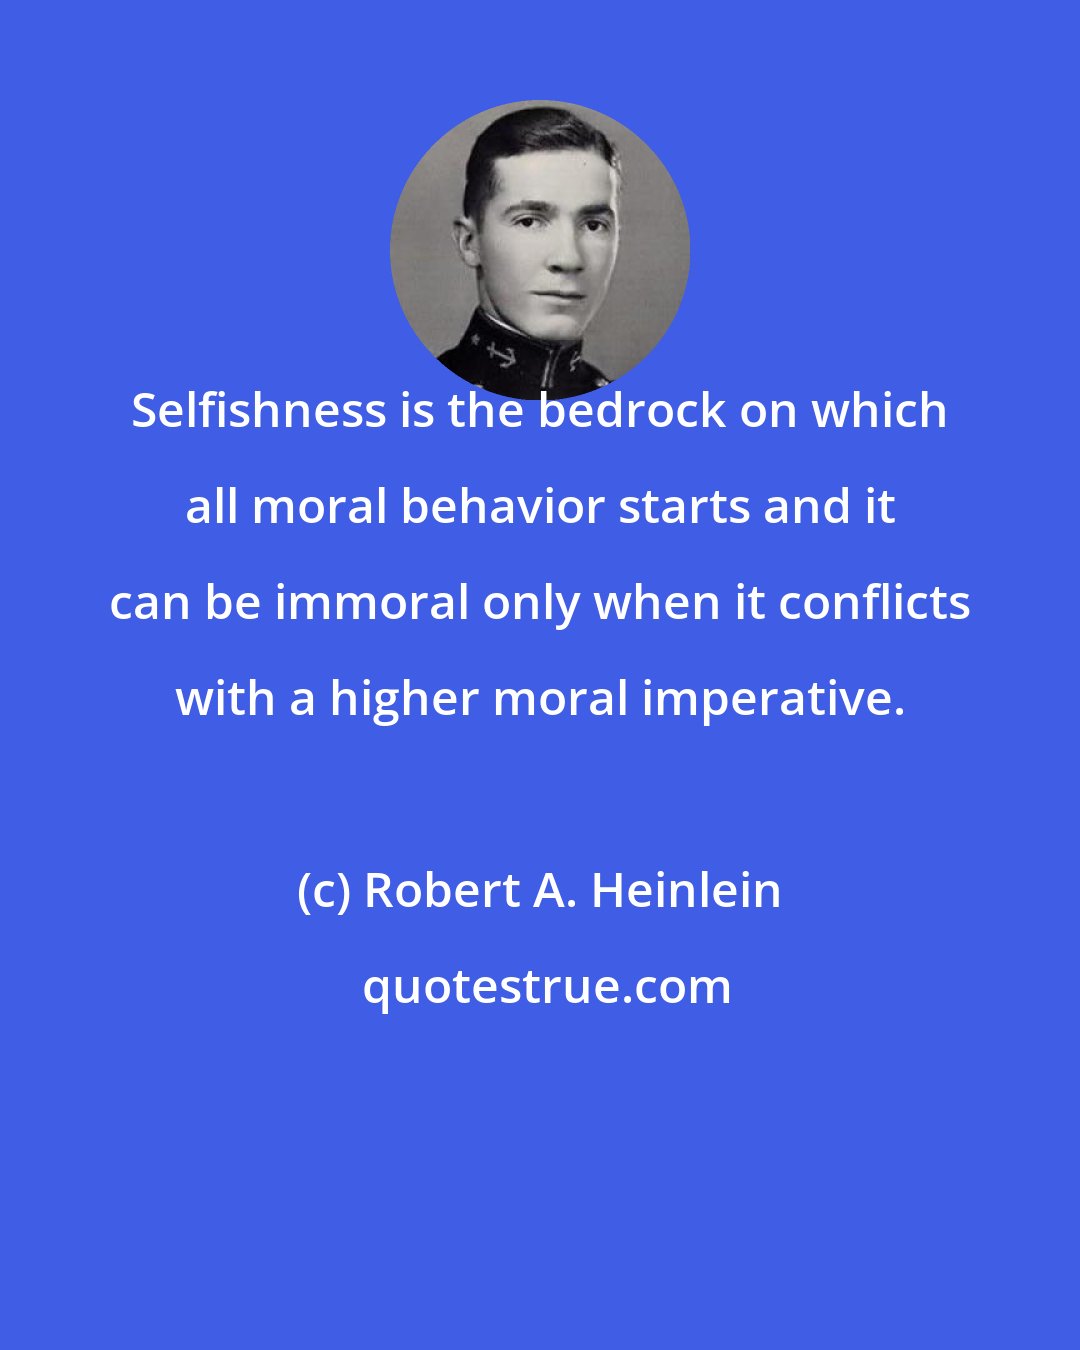 Robert A. Heinlein: Selfishness is the bedrock on which all moral behavior starts and it can be immoral only when it conflicts with a higher moral imperative.